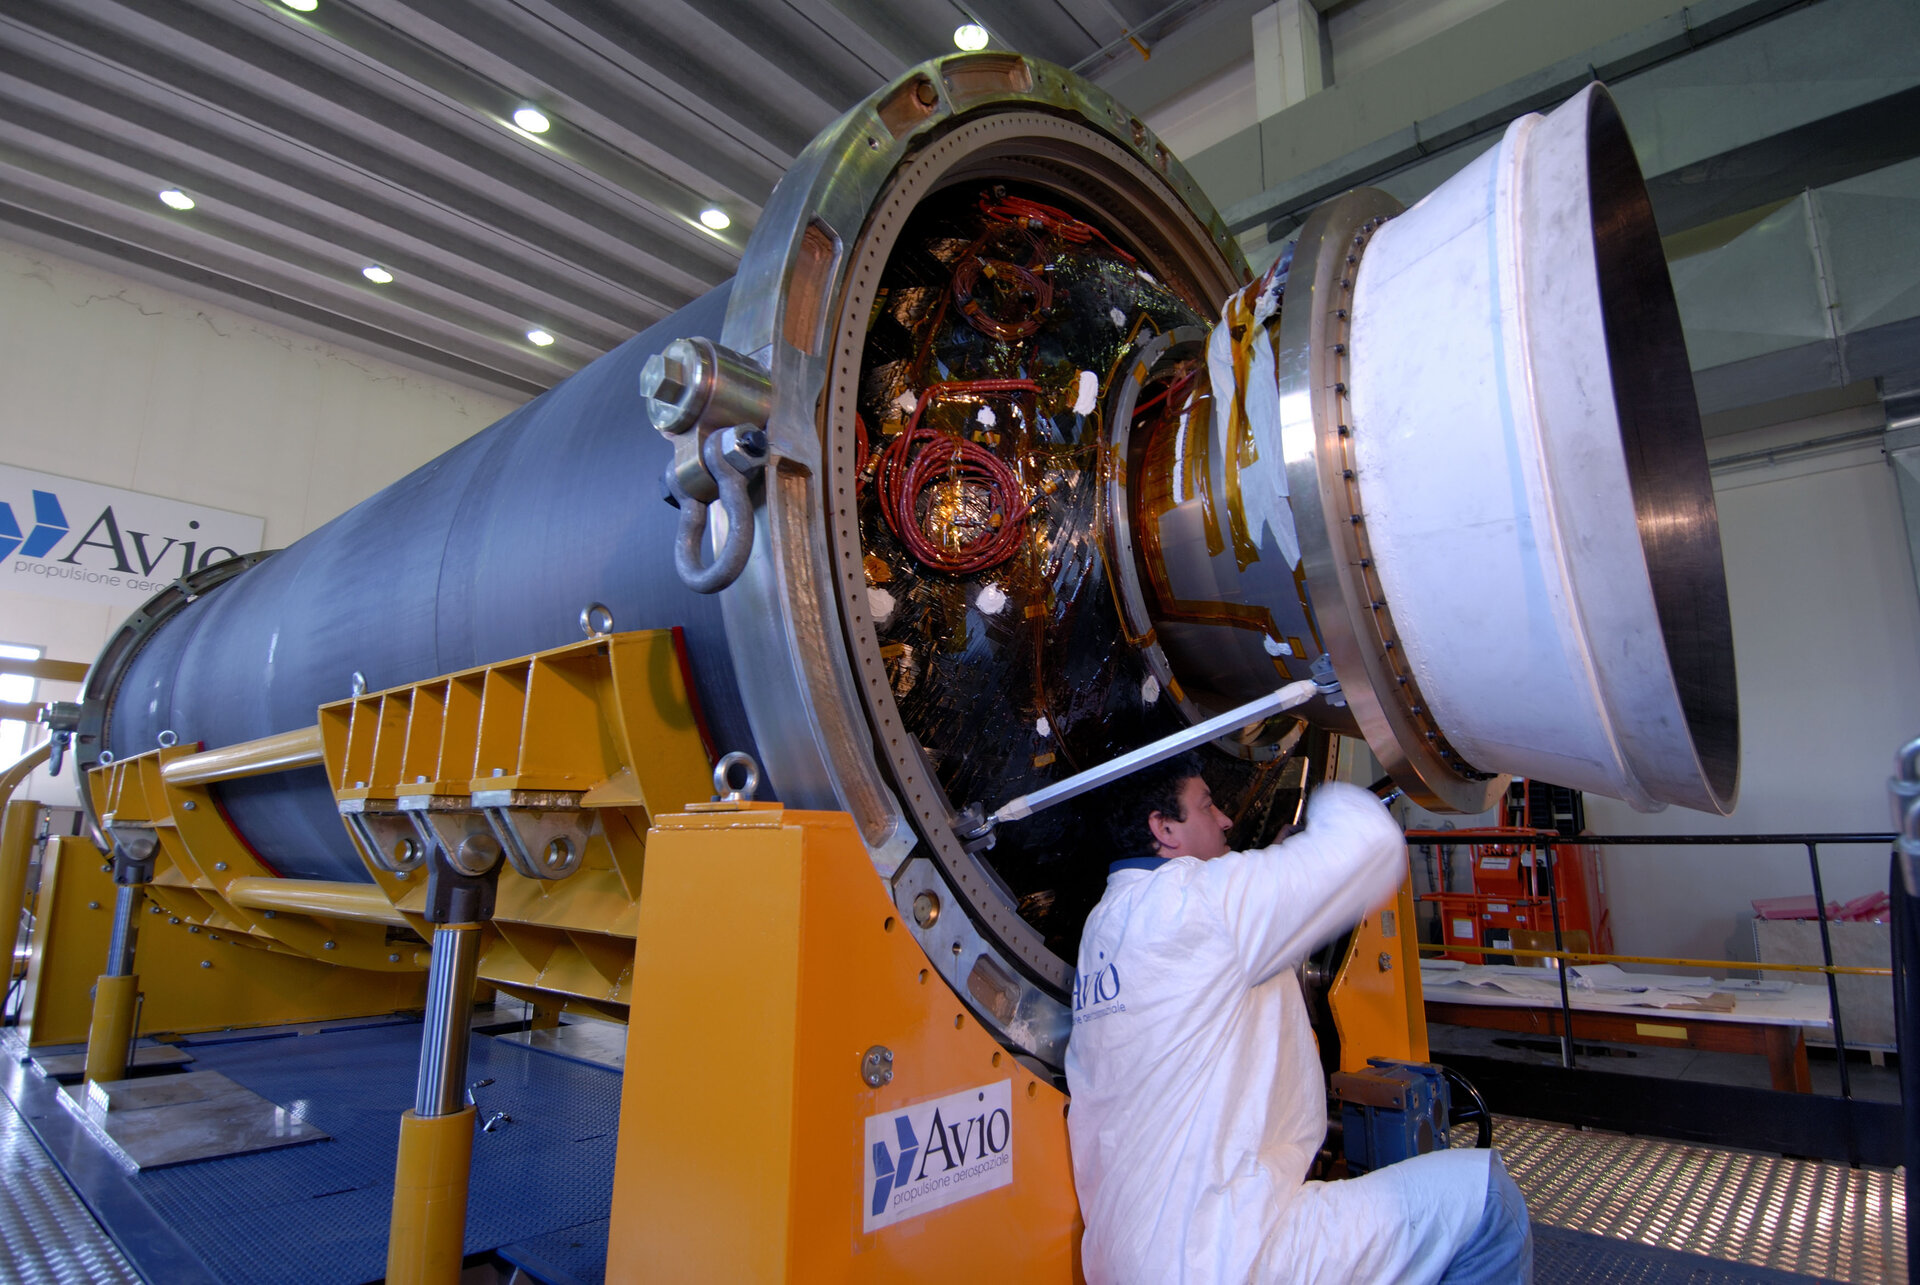 The thrust vector control system of the Zefiro 23 engine, part of the Vega launcher, was developed under GSTP